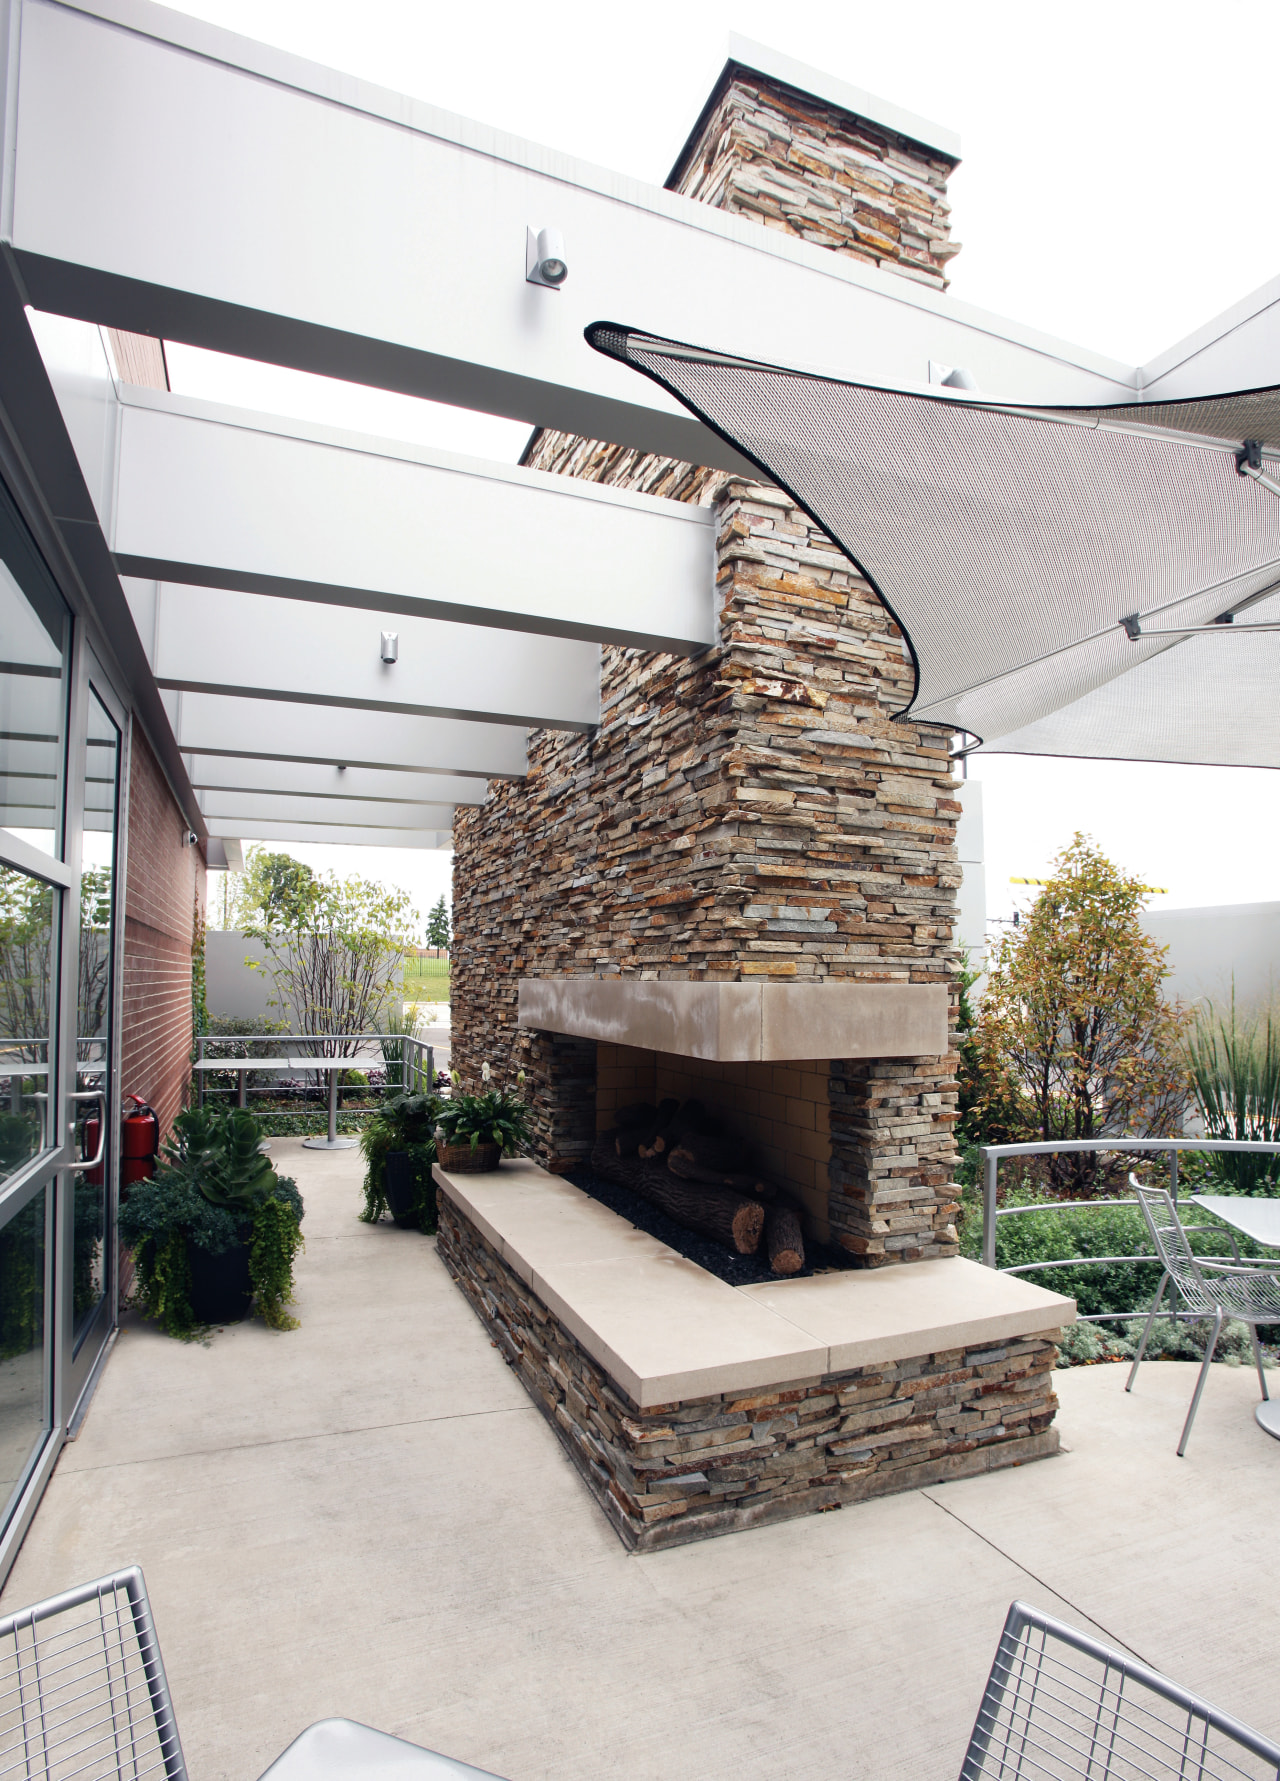 A wall of natural stone has a  rugged architecture, outdoor structure, patio, white